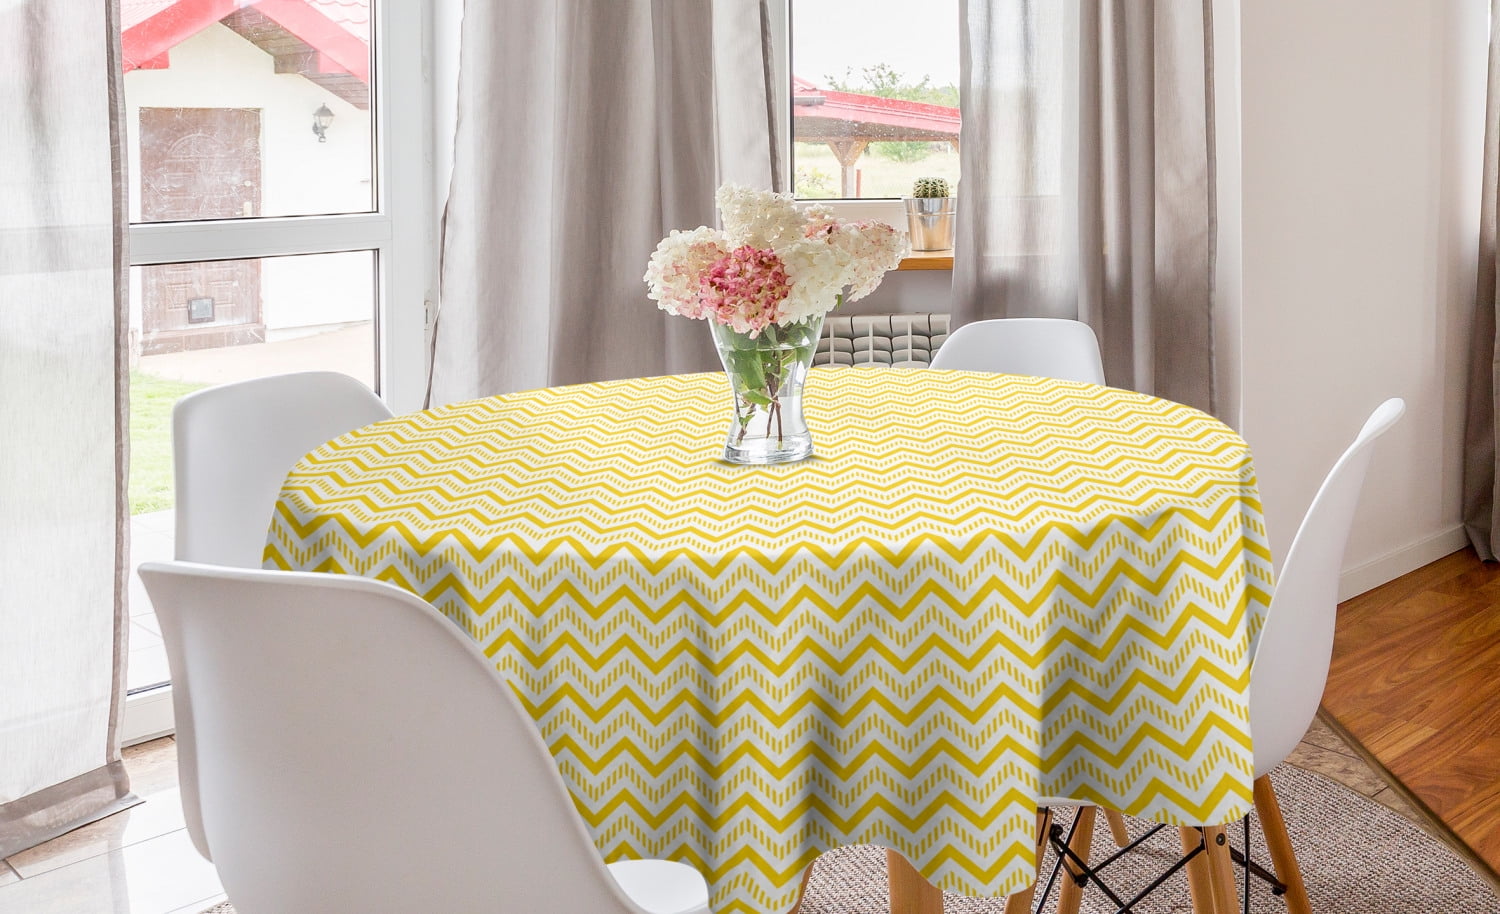 PVC TABLE CLOTH MOSAIC CHECK ORANGE YELLOW GREEN CREAM MED WIPE ABLE PROTECTOR 